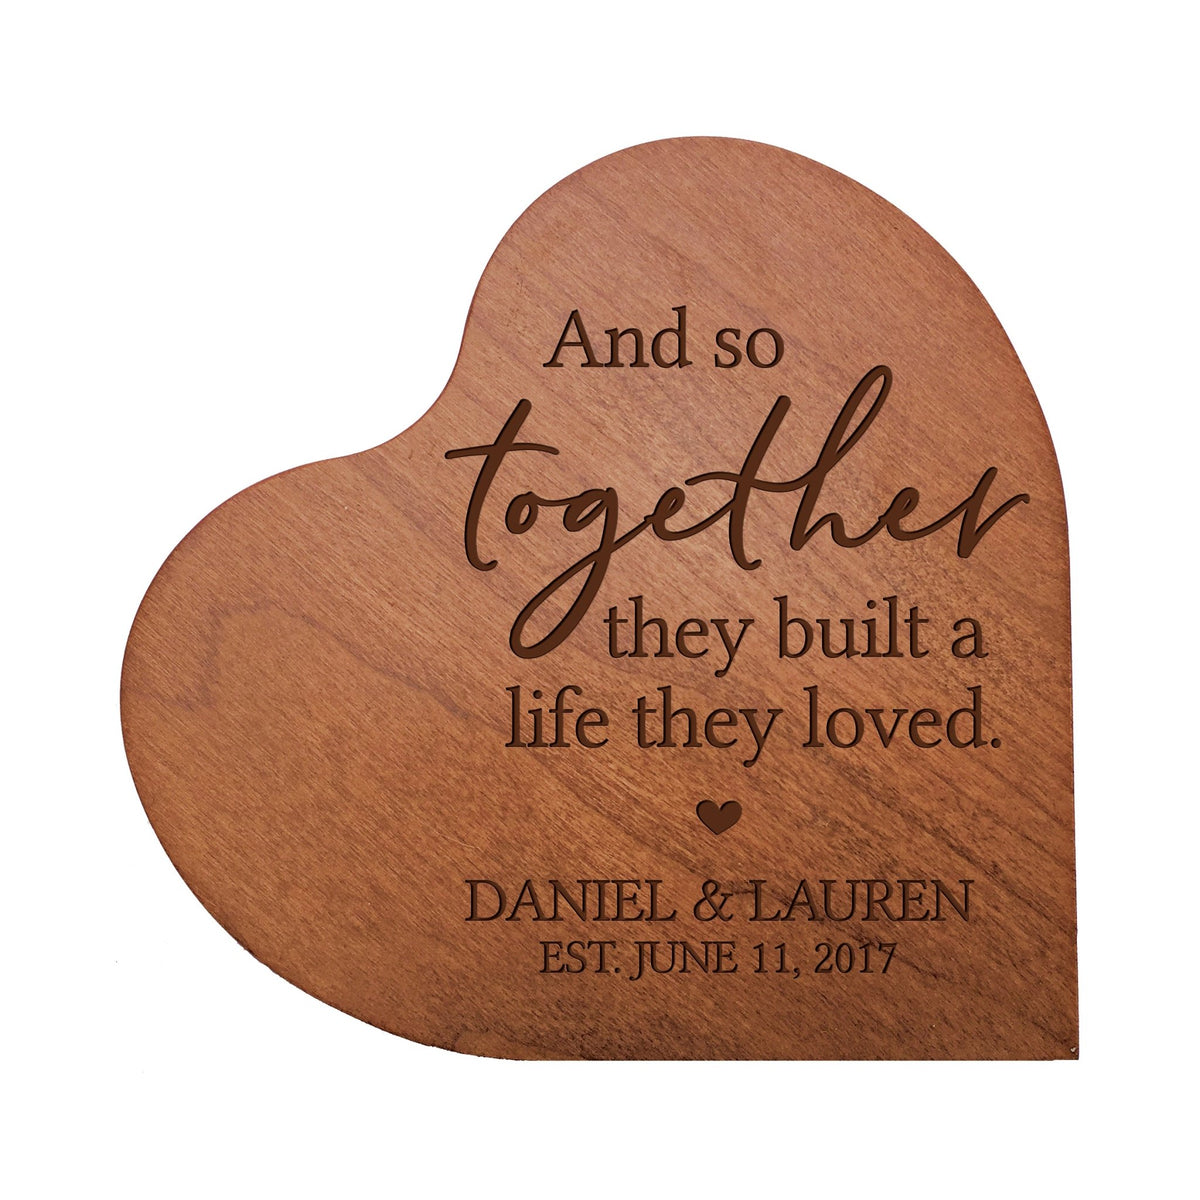 Personalized Engraved Wooden Inspirational Heart Block 5” x 5.25” x 0.75” - And So Together - LifeSong Milestones